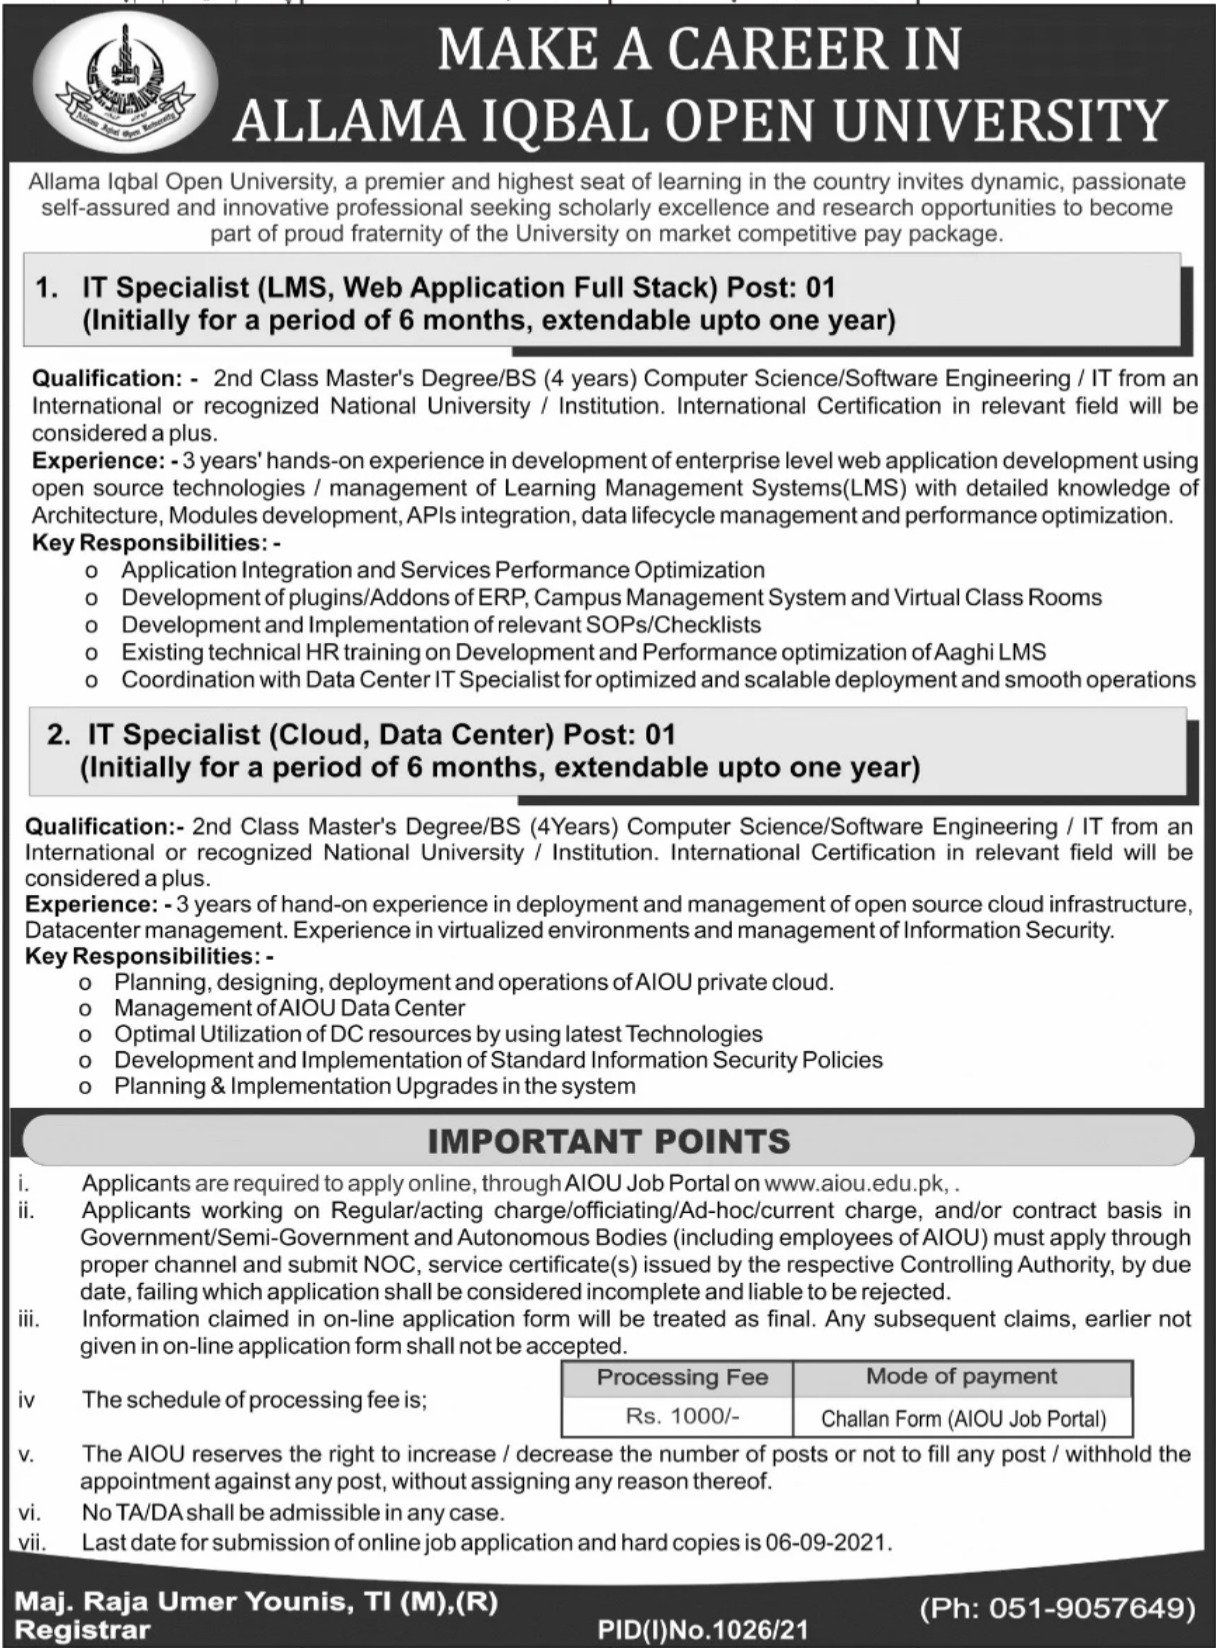 Allama Iqbal Open University AIOU Jobs 2021 For IT Specialists